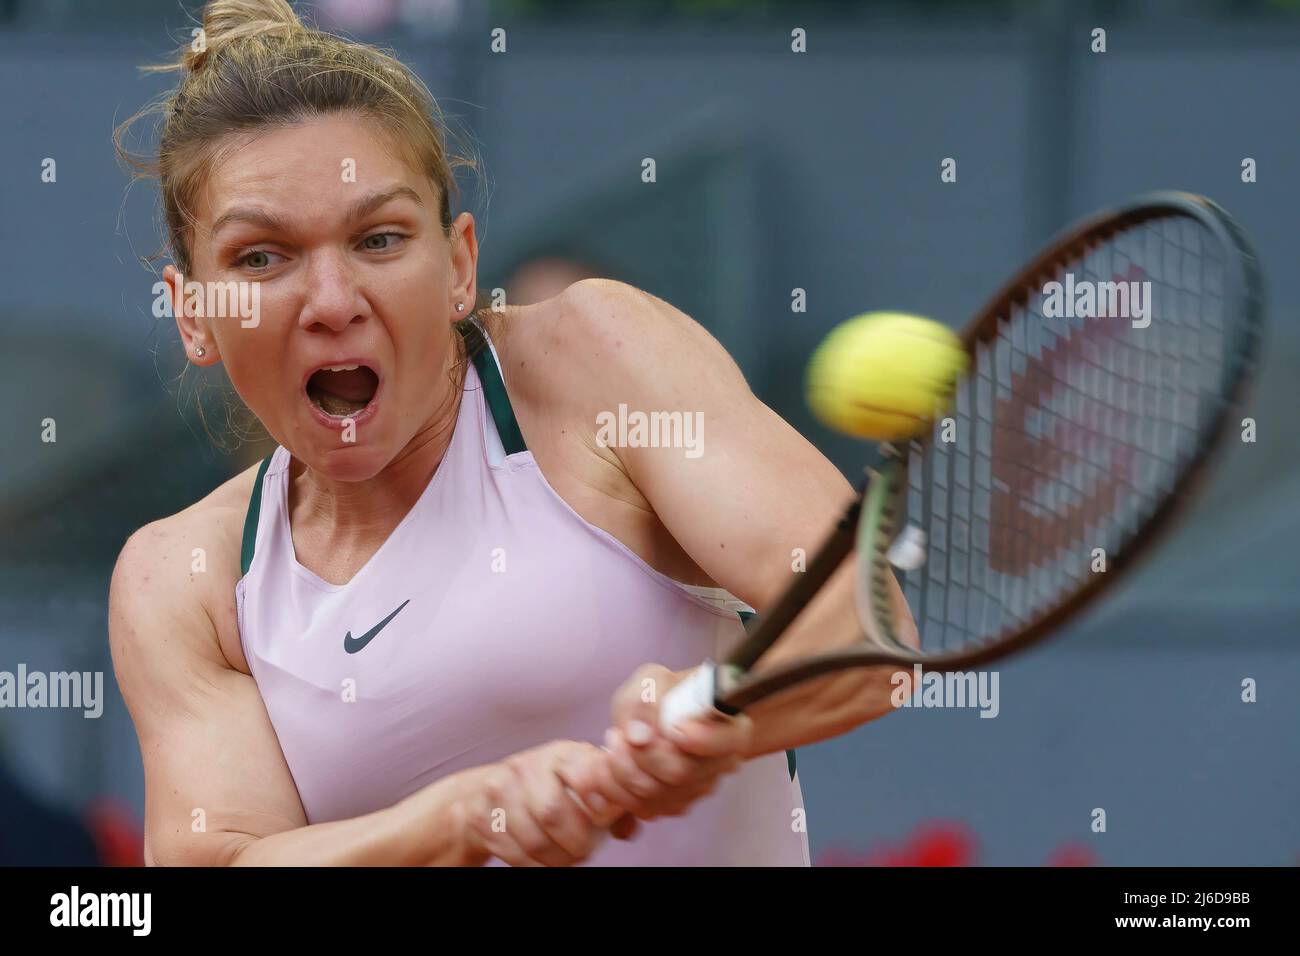 Simona Halep of Romania plays against Paula Badosa of Spain in her second  round match on Day 3 of the Mutua Madrid Open at La Caja Magica in Madrid. Simona  Halep beats